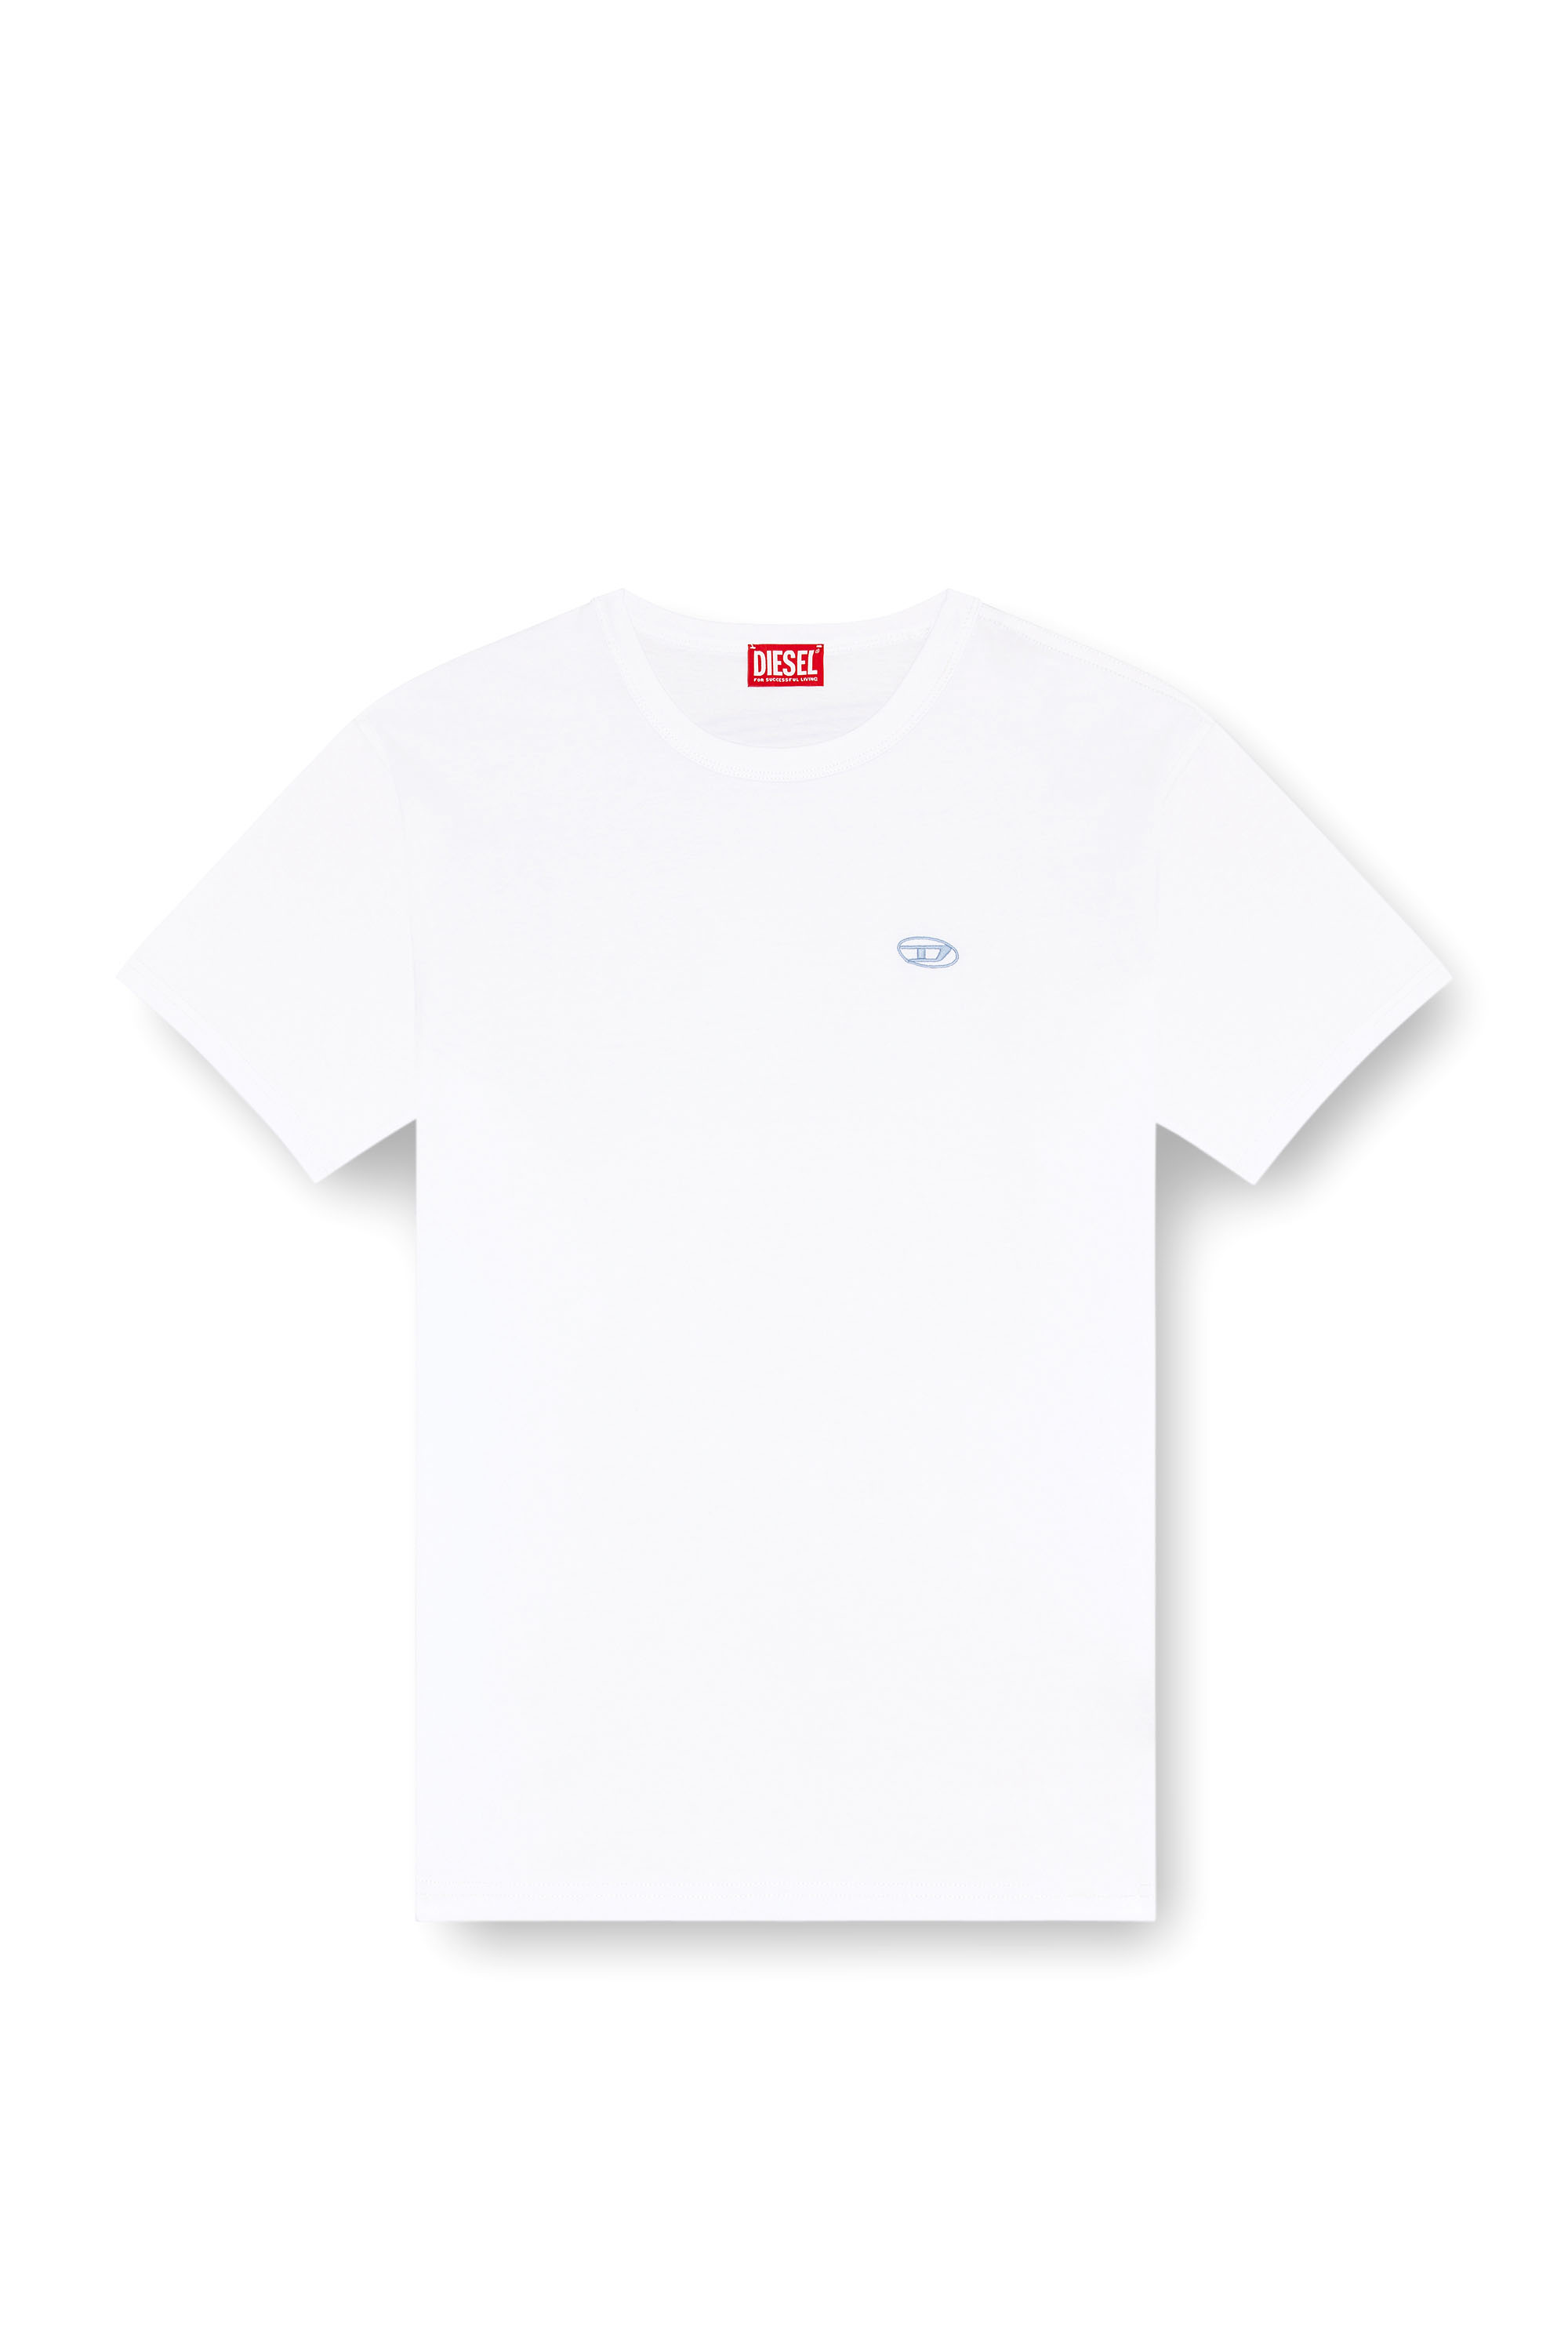 Diesel - T-BOXT-K18, Man T-shirt with Oval D print and embroidery in White - Image 3